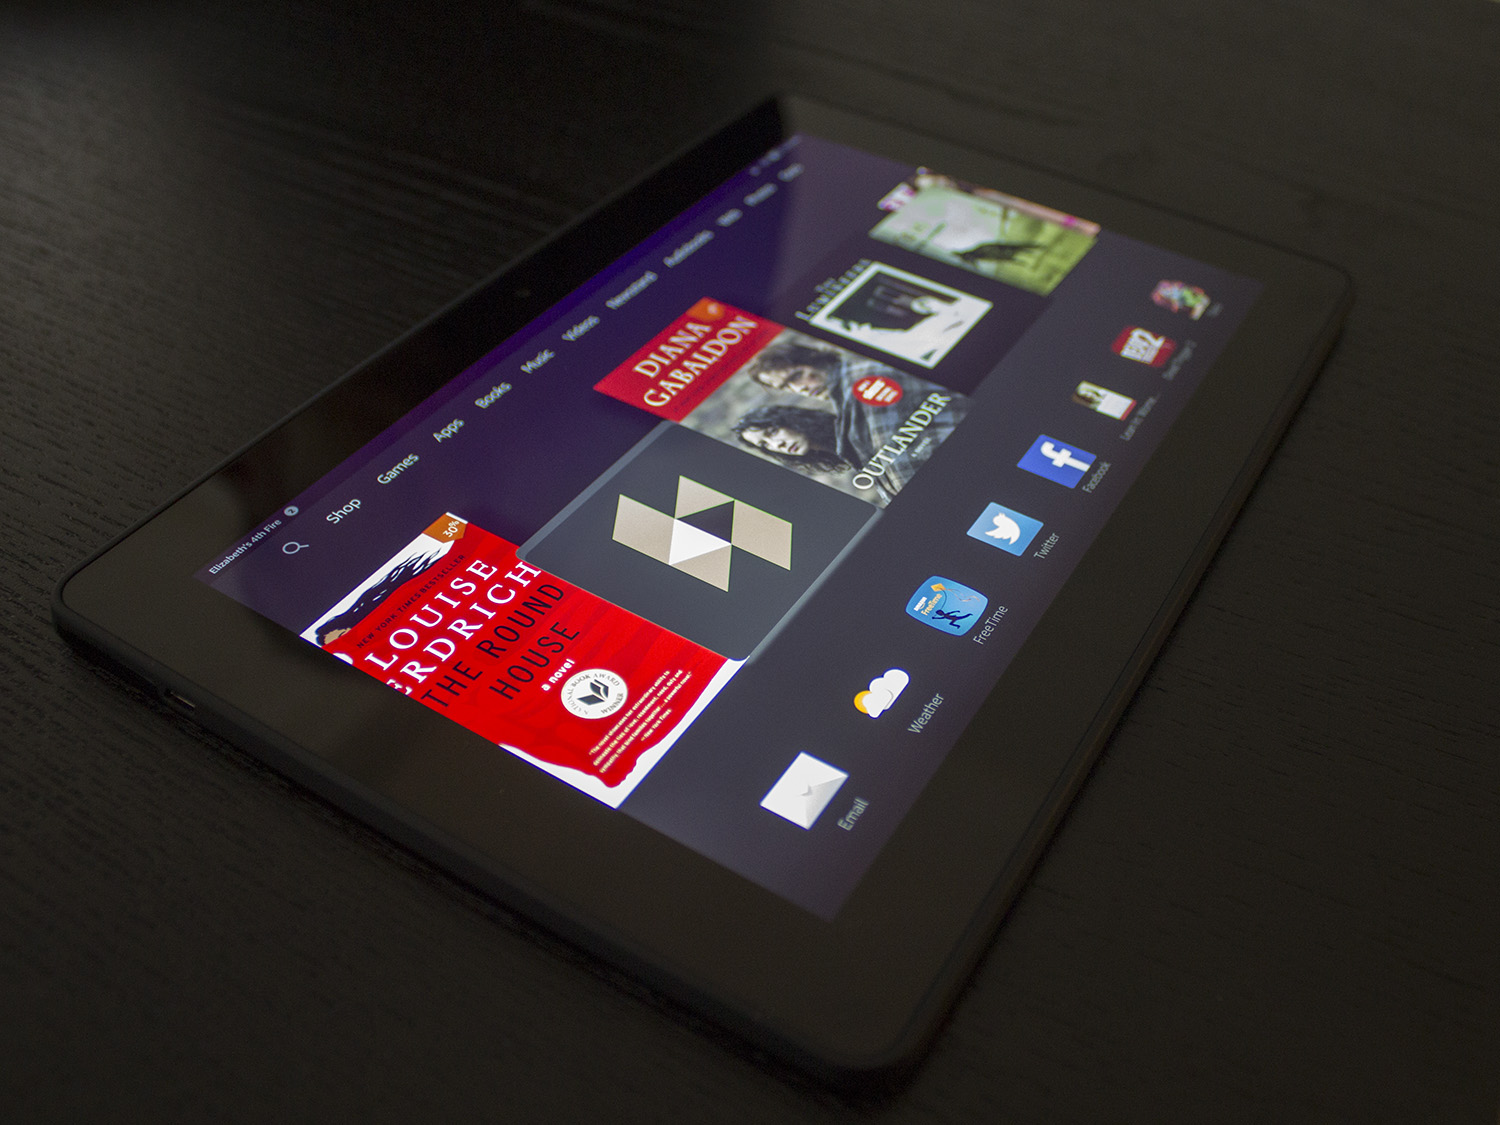 the tablet has many different media features on it